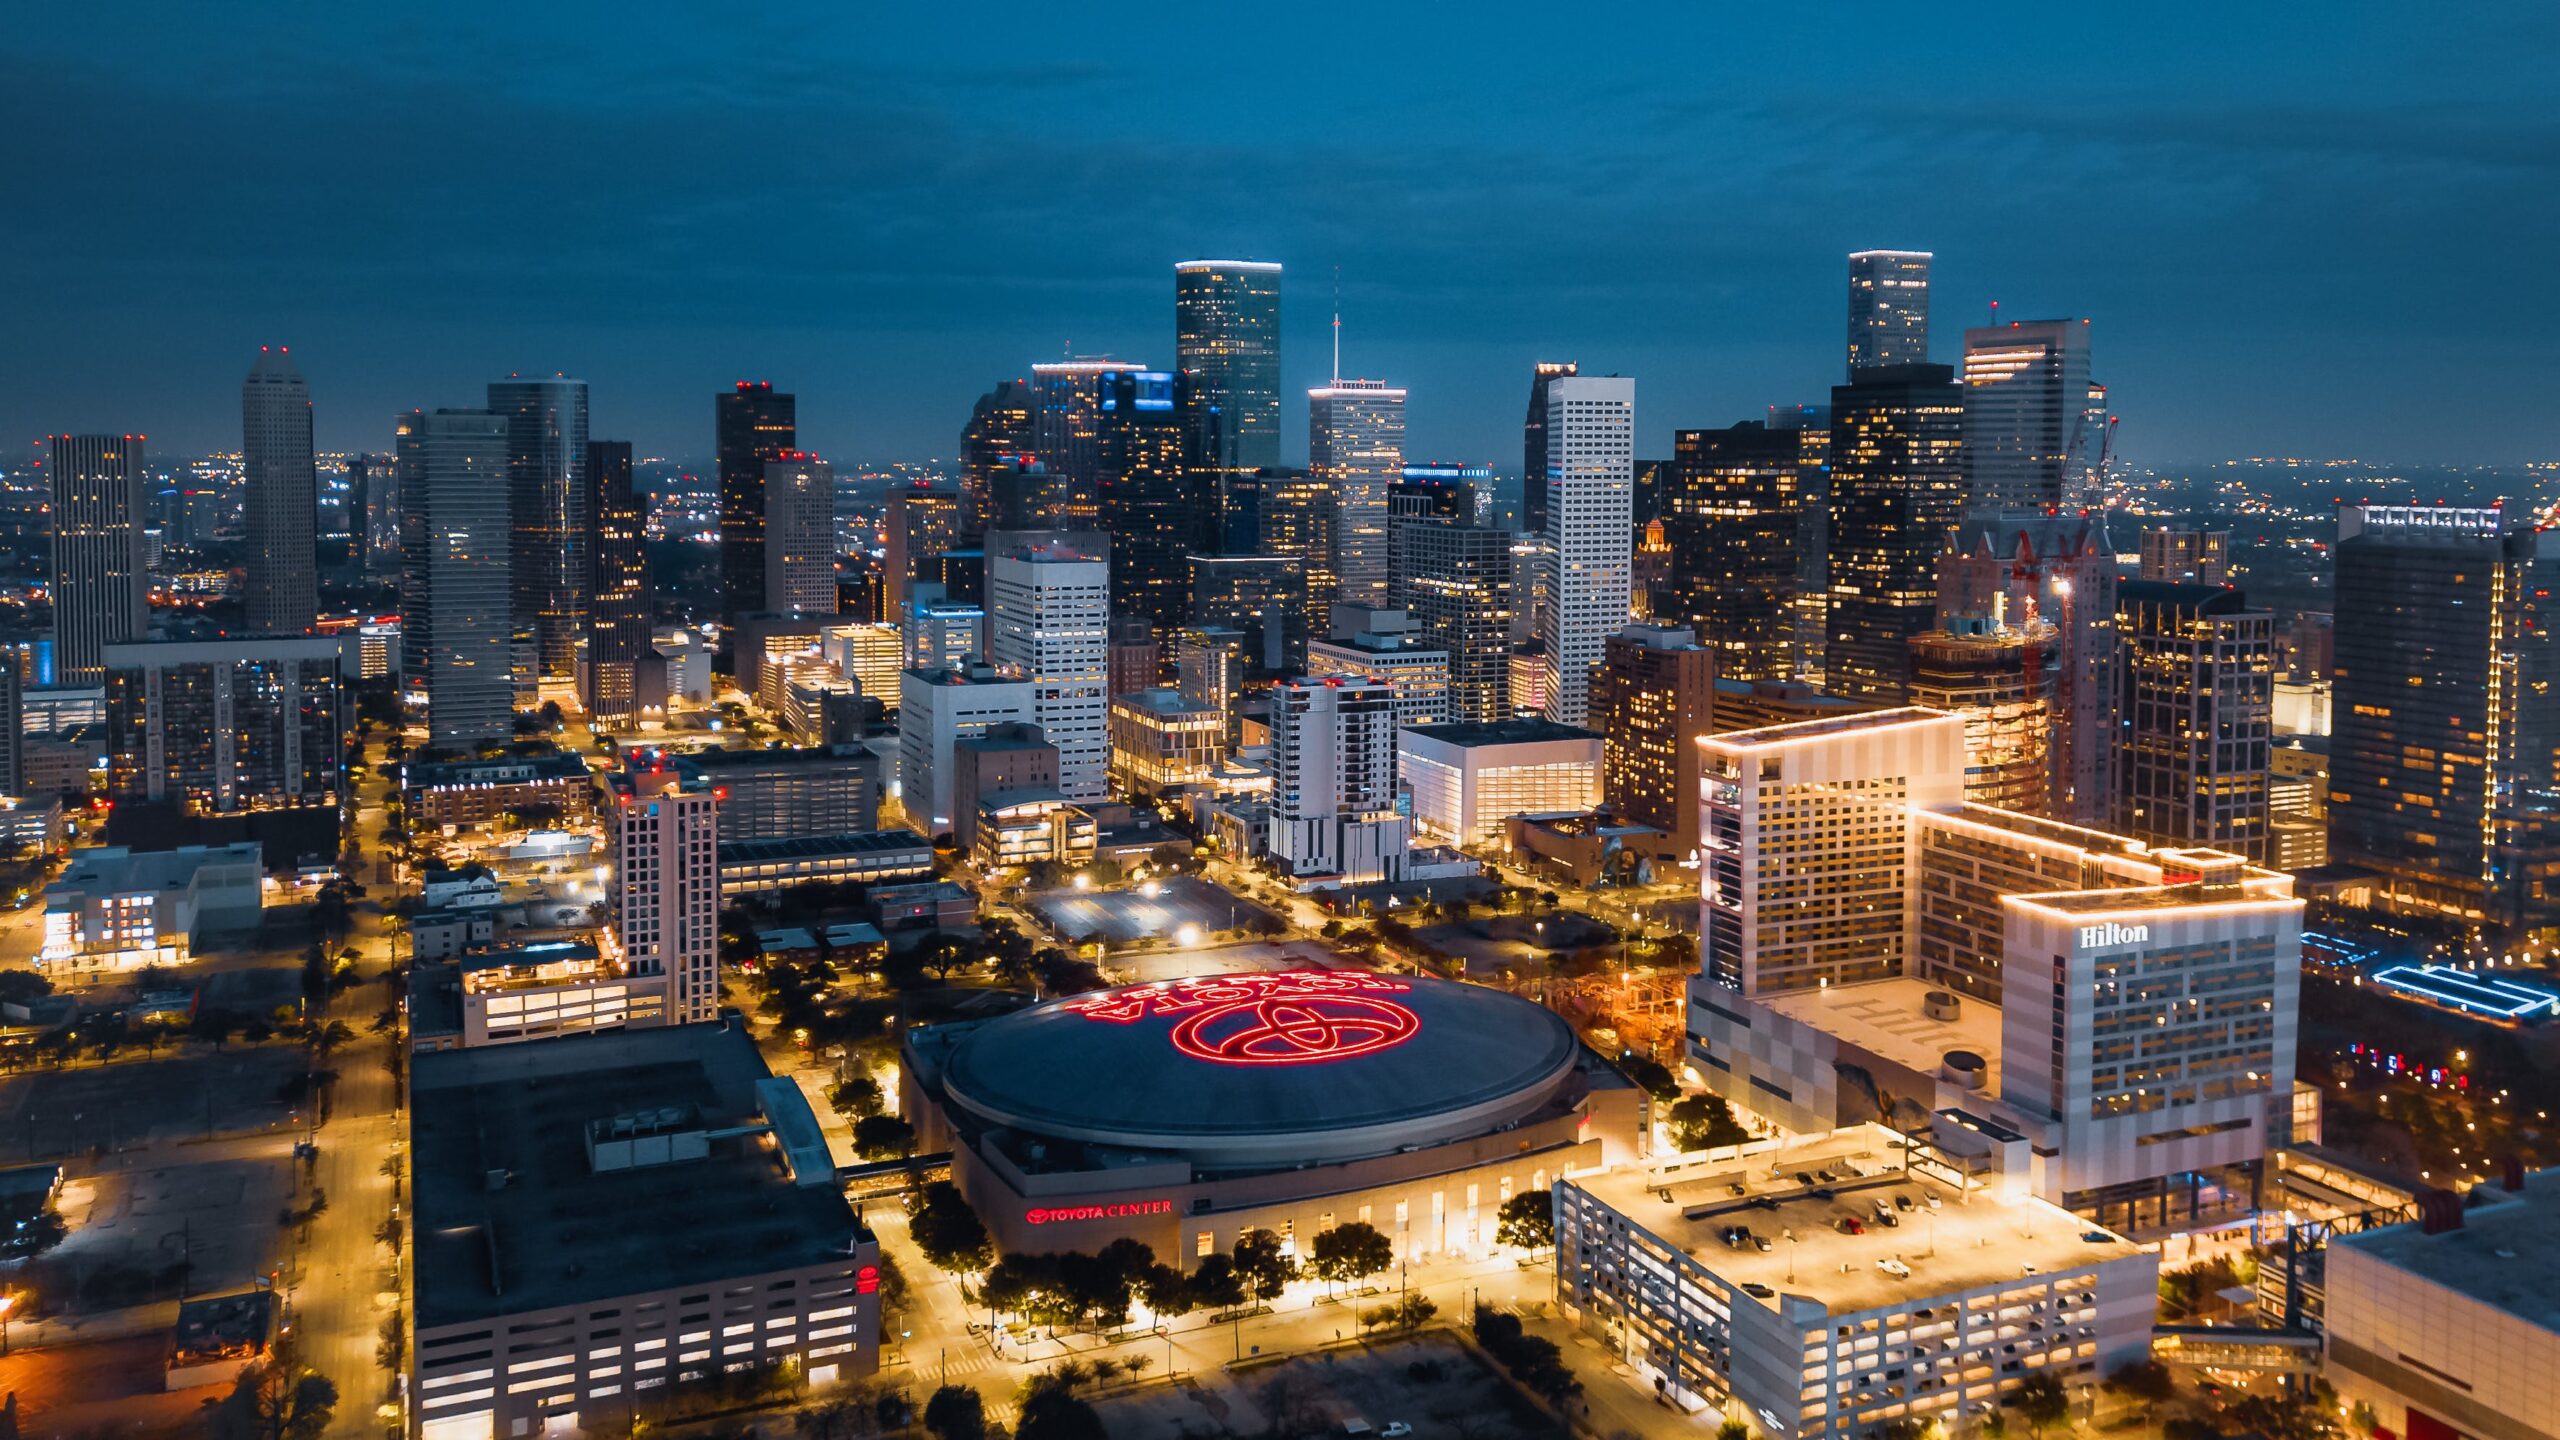 Downtown is the heart and center of Houston and one of the best places to live in the city. Because of its amenities, young professionals and families love living here. Pictured: An aerial view of Downtown Houston